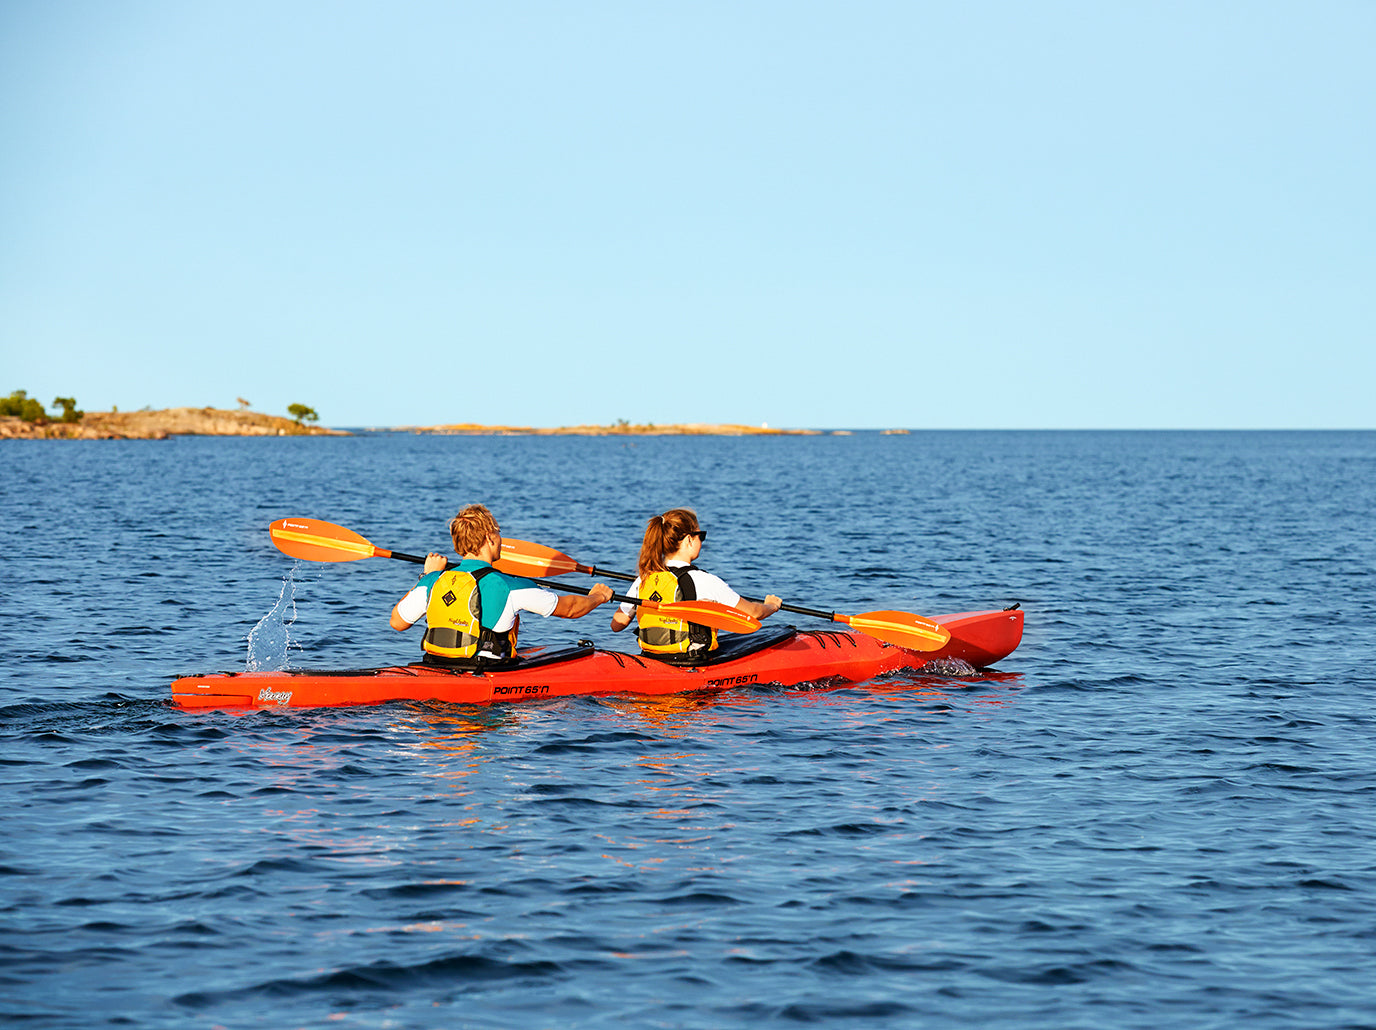 All Kayaks by Point 65 Sweden